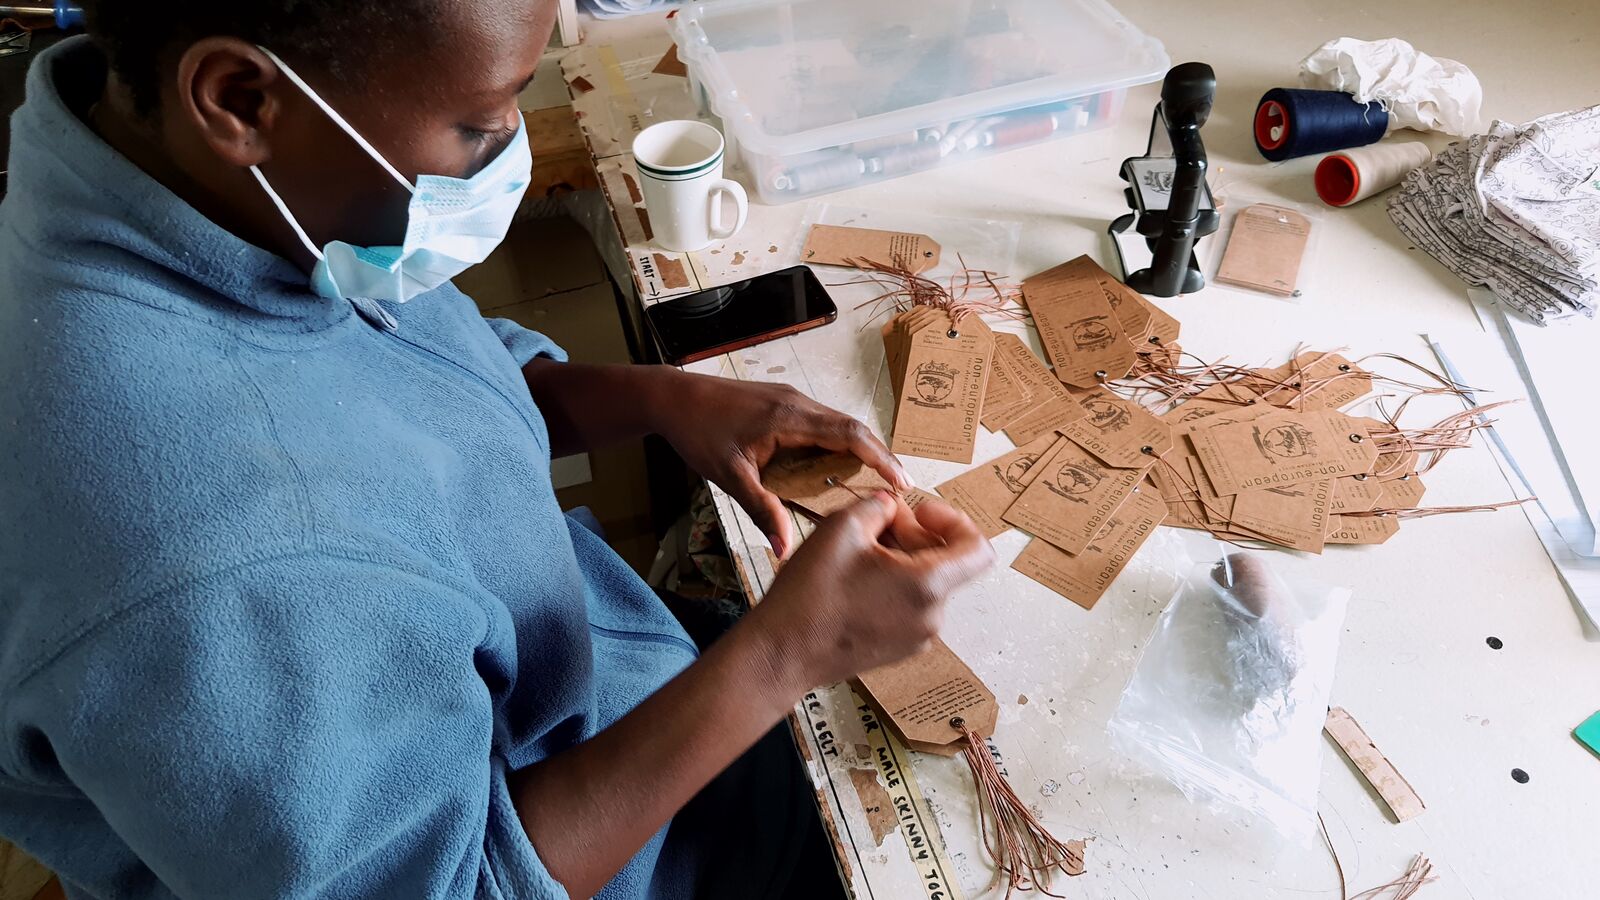 A worker at non-european clothing creates product tags